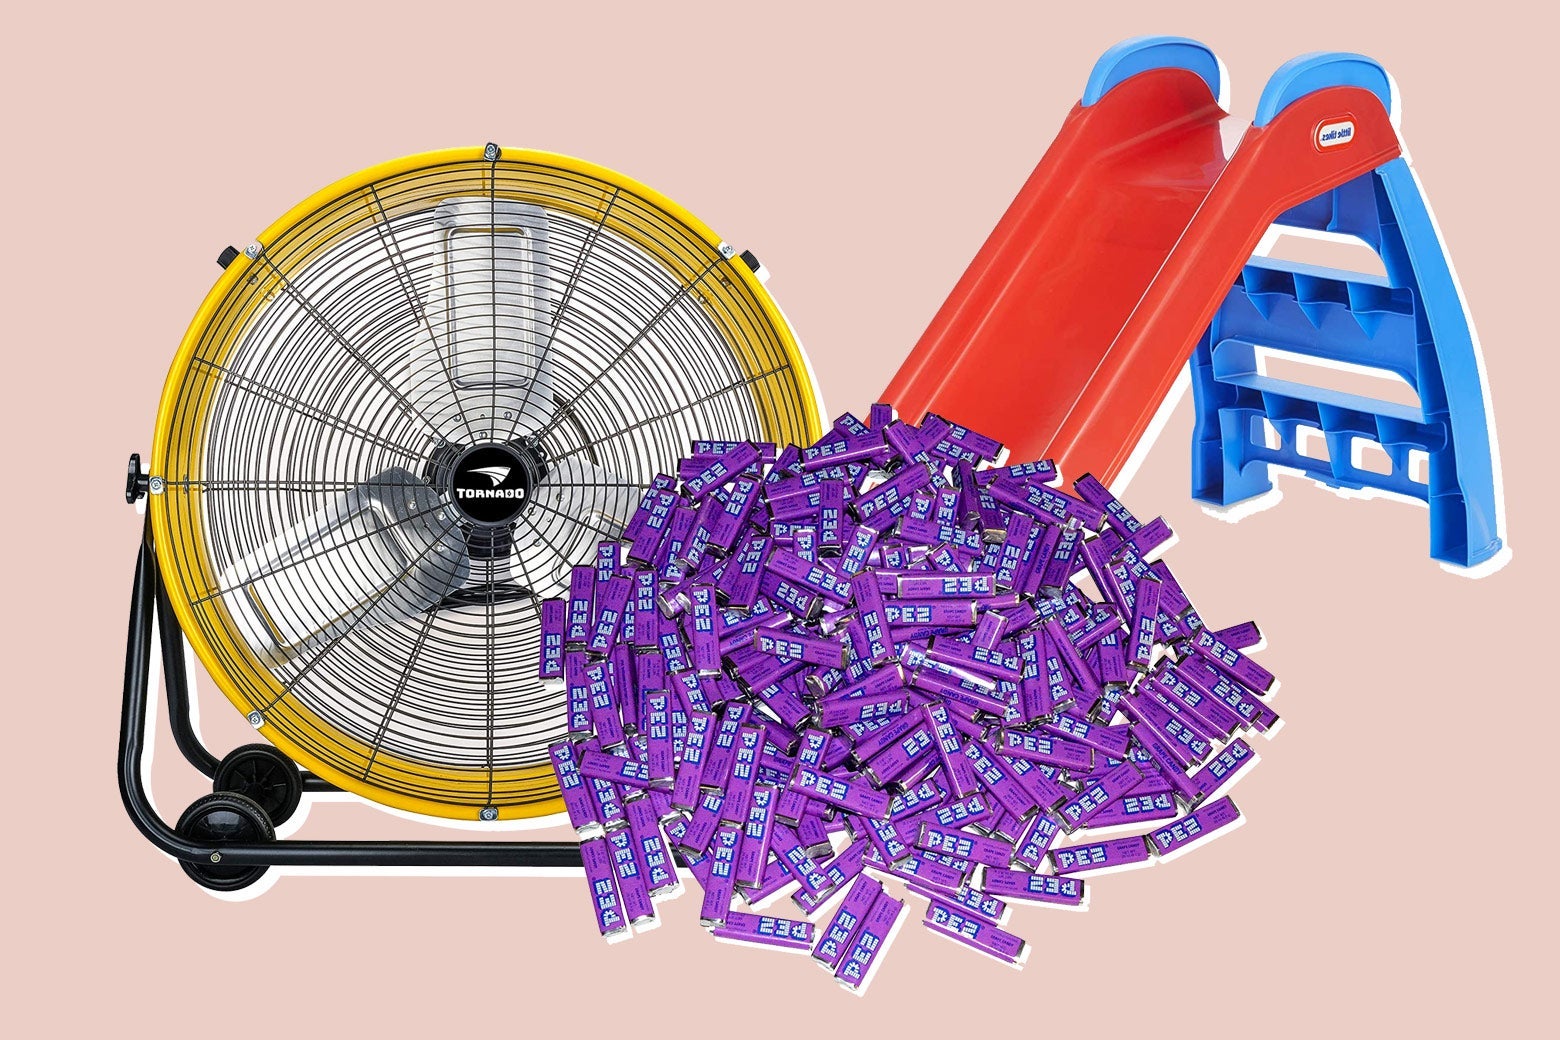 A pile of grape Pez candy, a large fan, and a plastic slide.